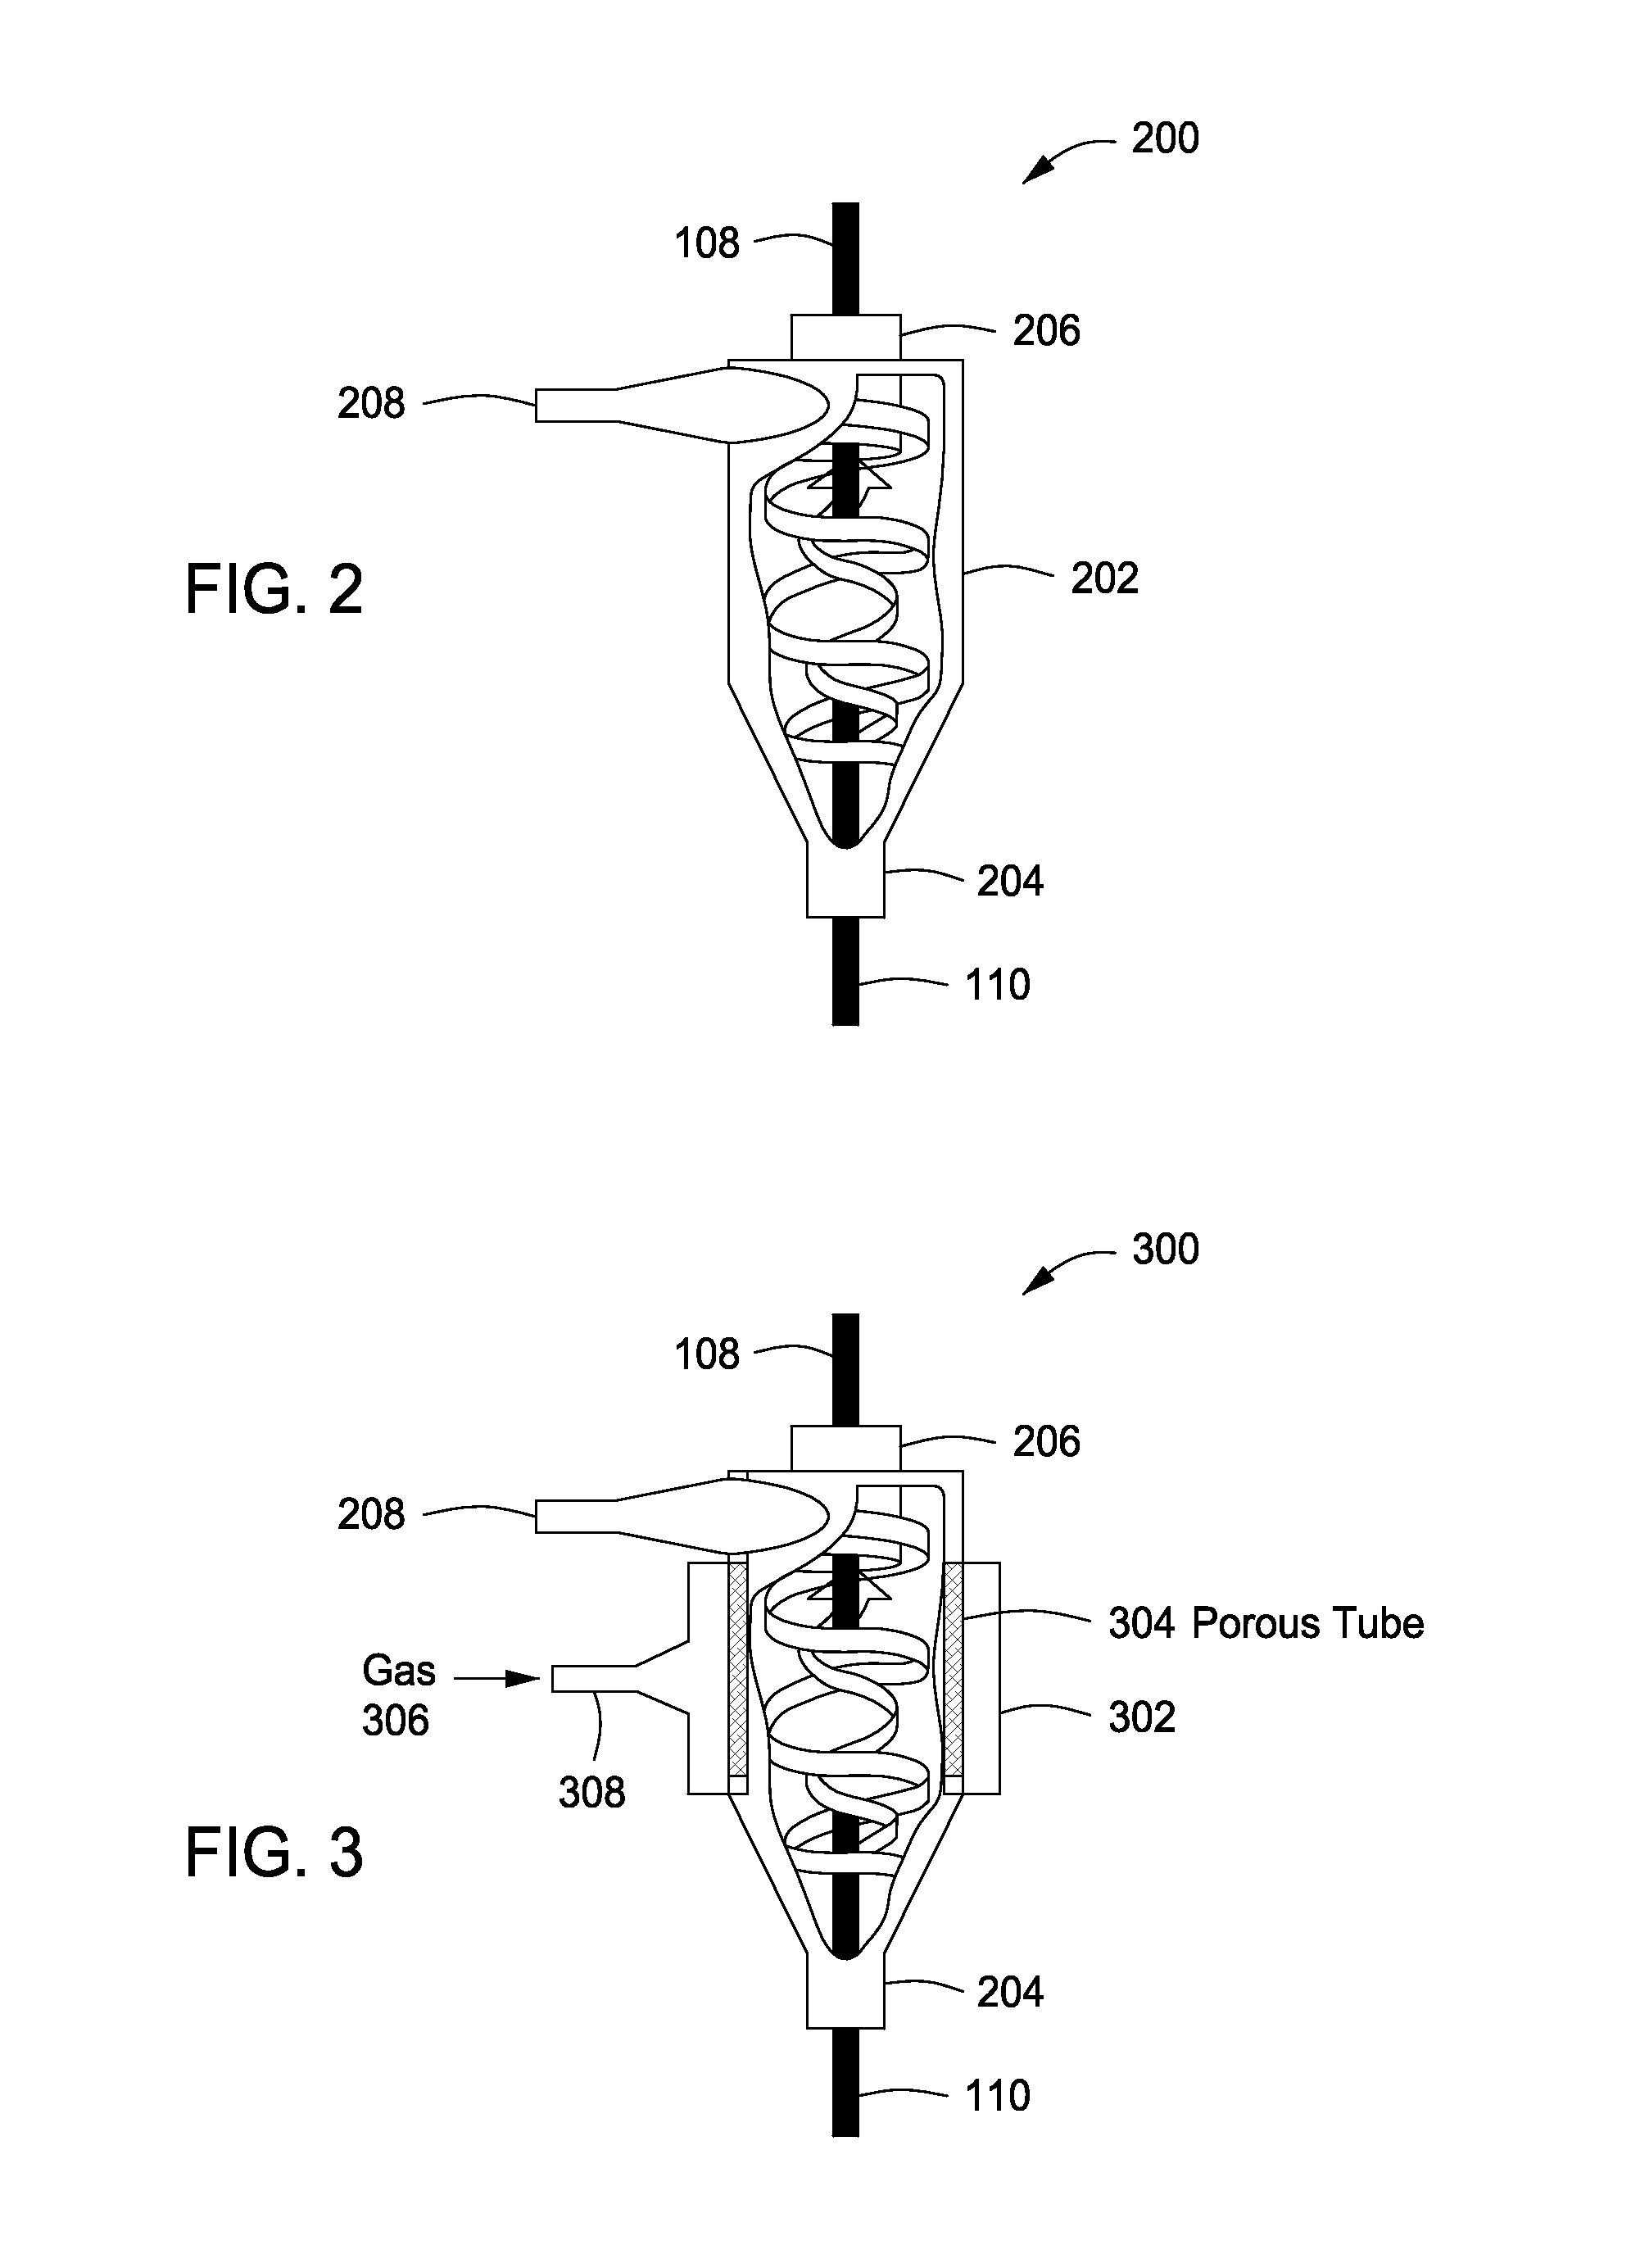 Apparatus for treating liquids with wave energy from an electrical arc